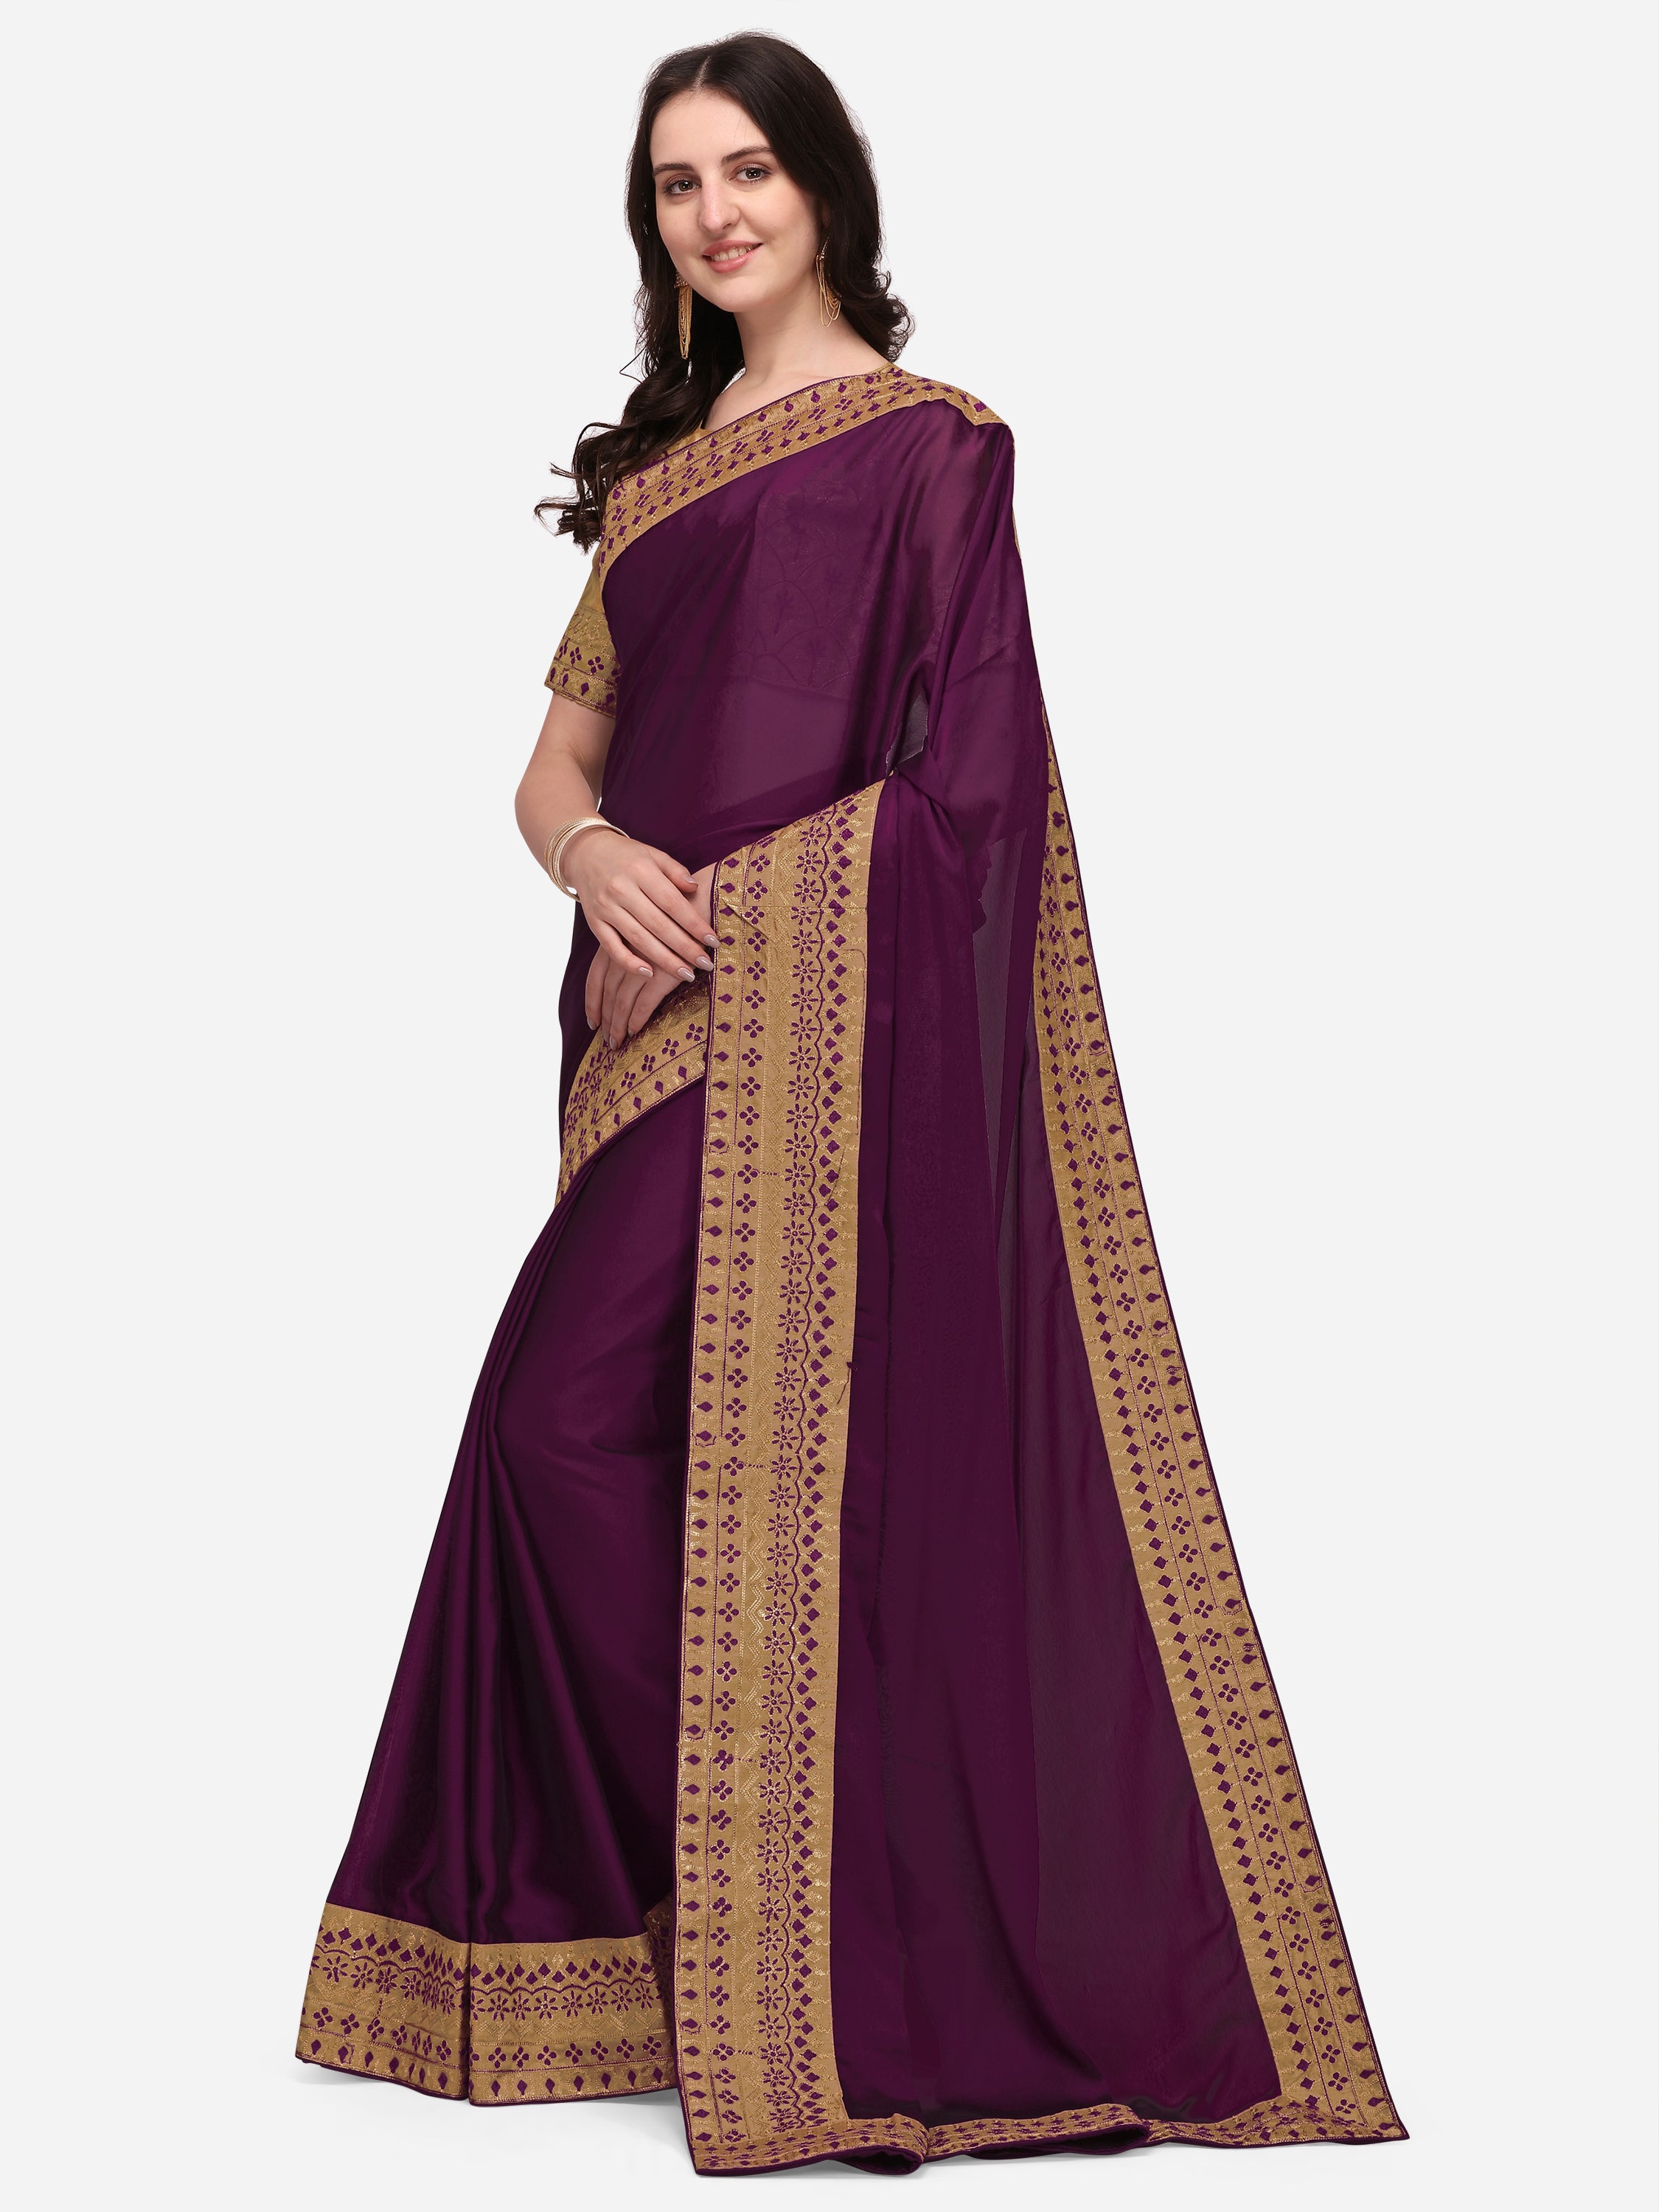 Women's self Woven Solid Occasion Wear Cotton Silk Embroided Heavy Border Sari With Blouse Piece (Purple) - NIMIDHYA